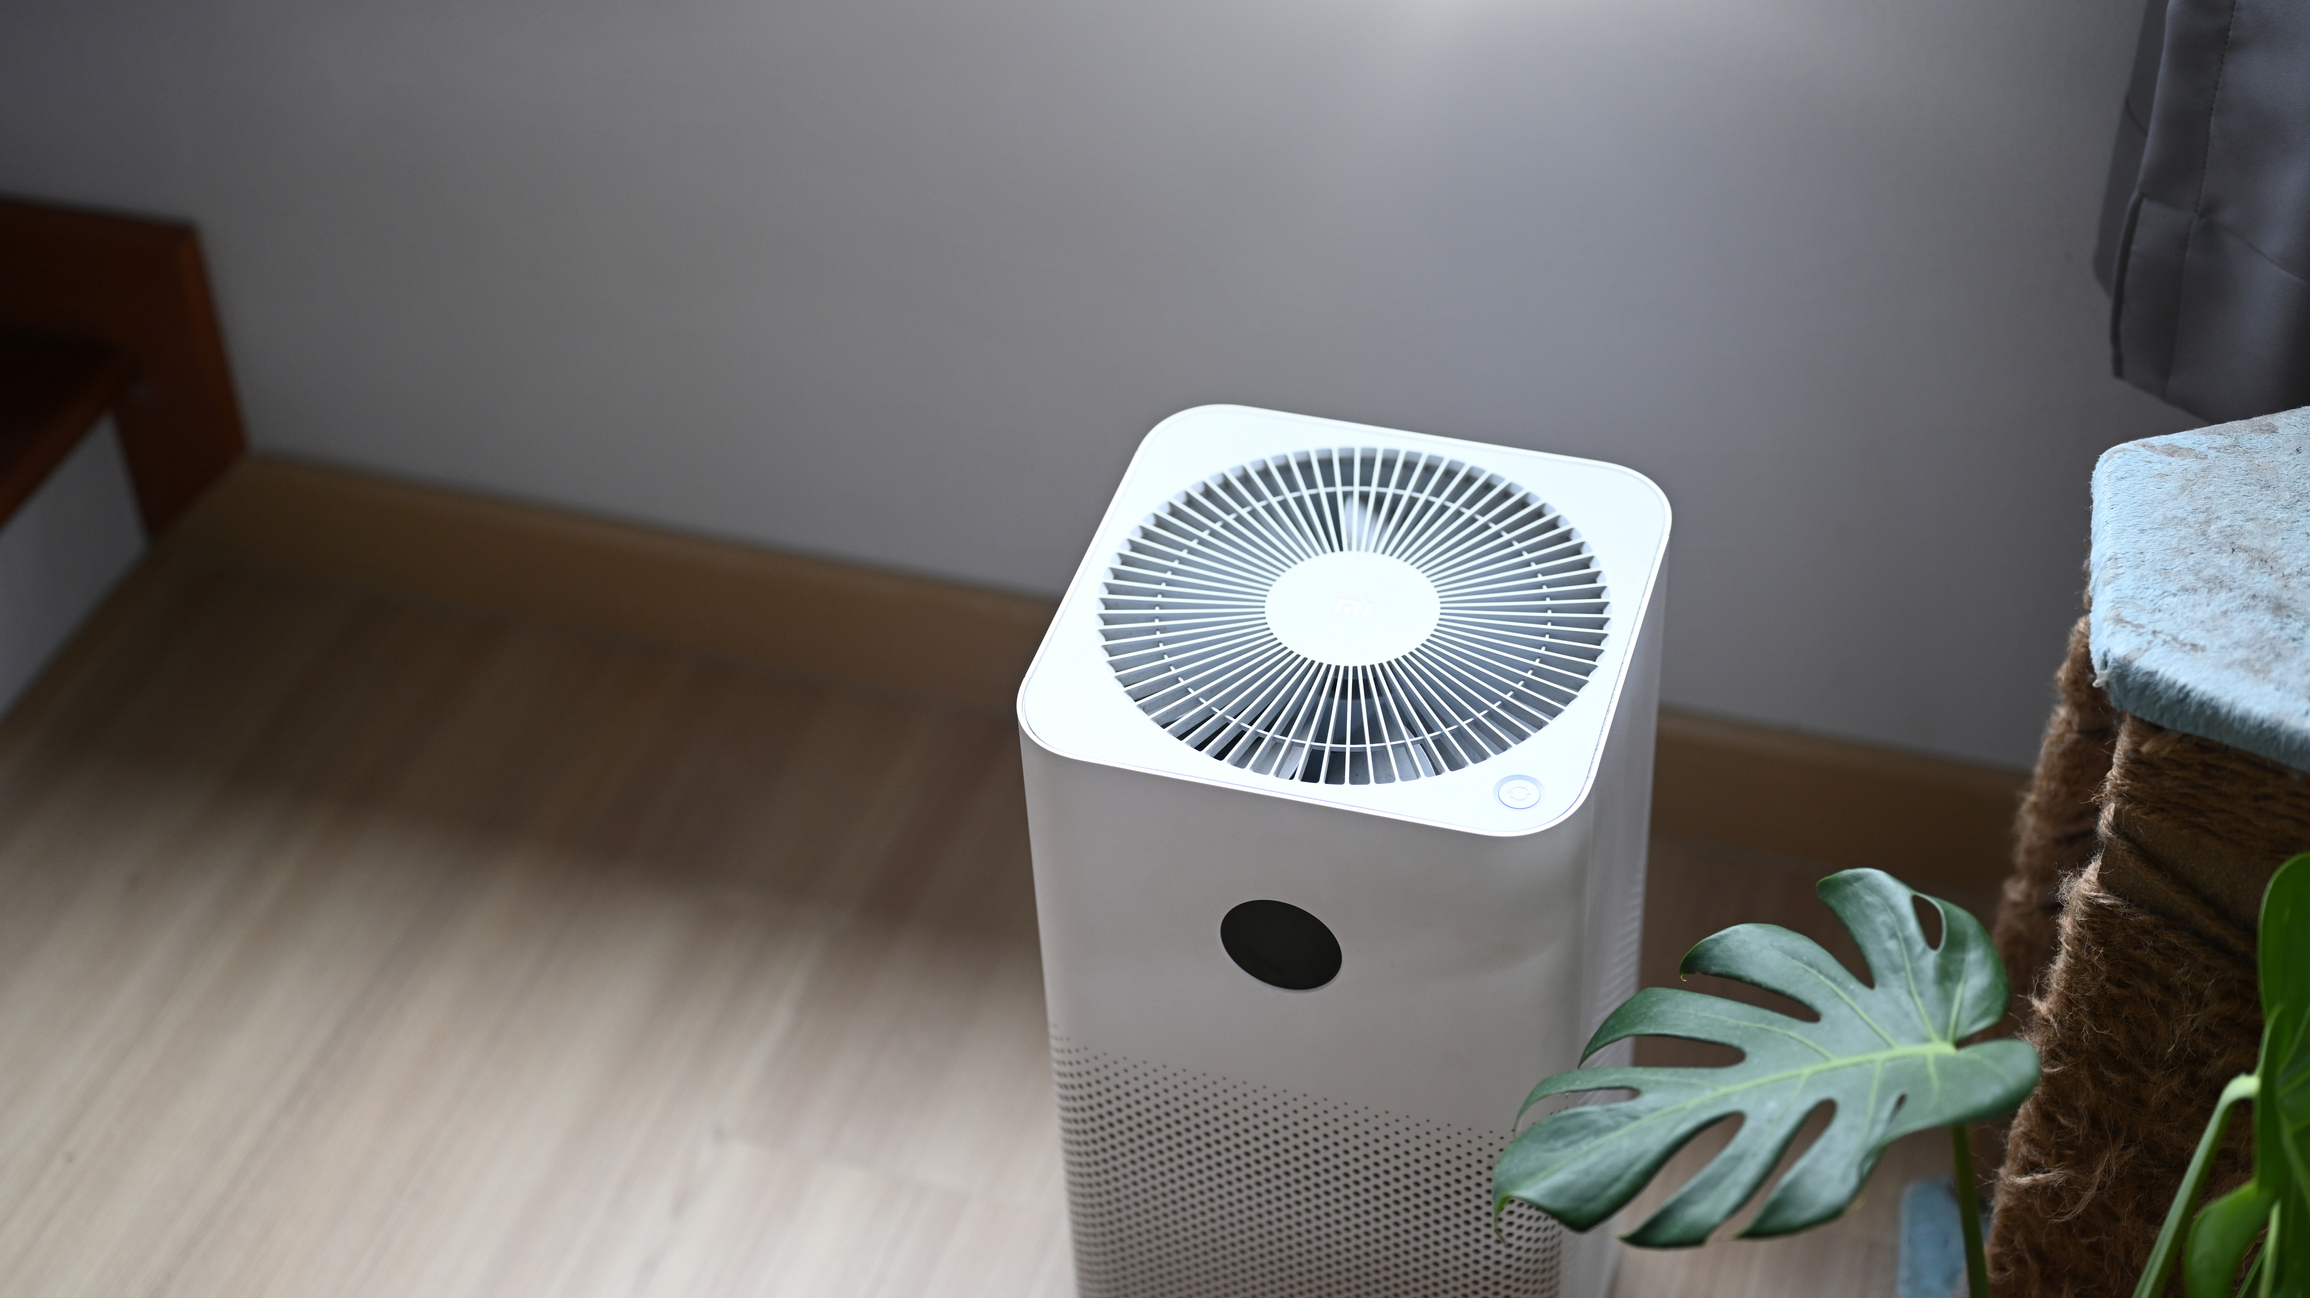 How to Find a Portable Air Purifier to Help Reduce Exposure to COVID-19  Aerosols